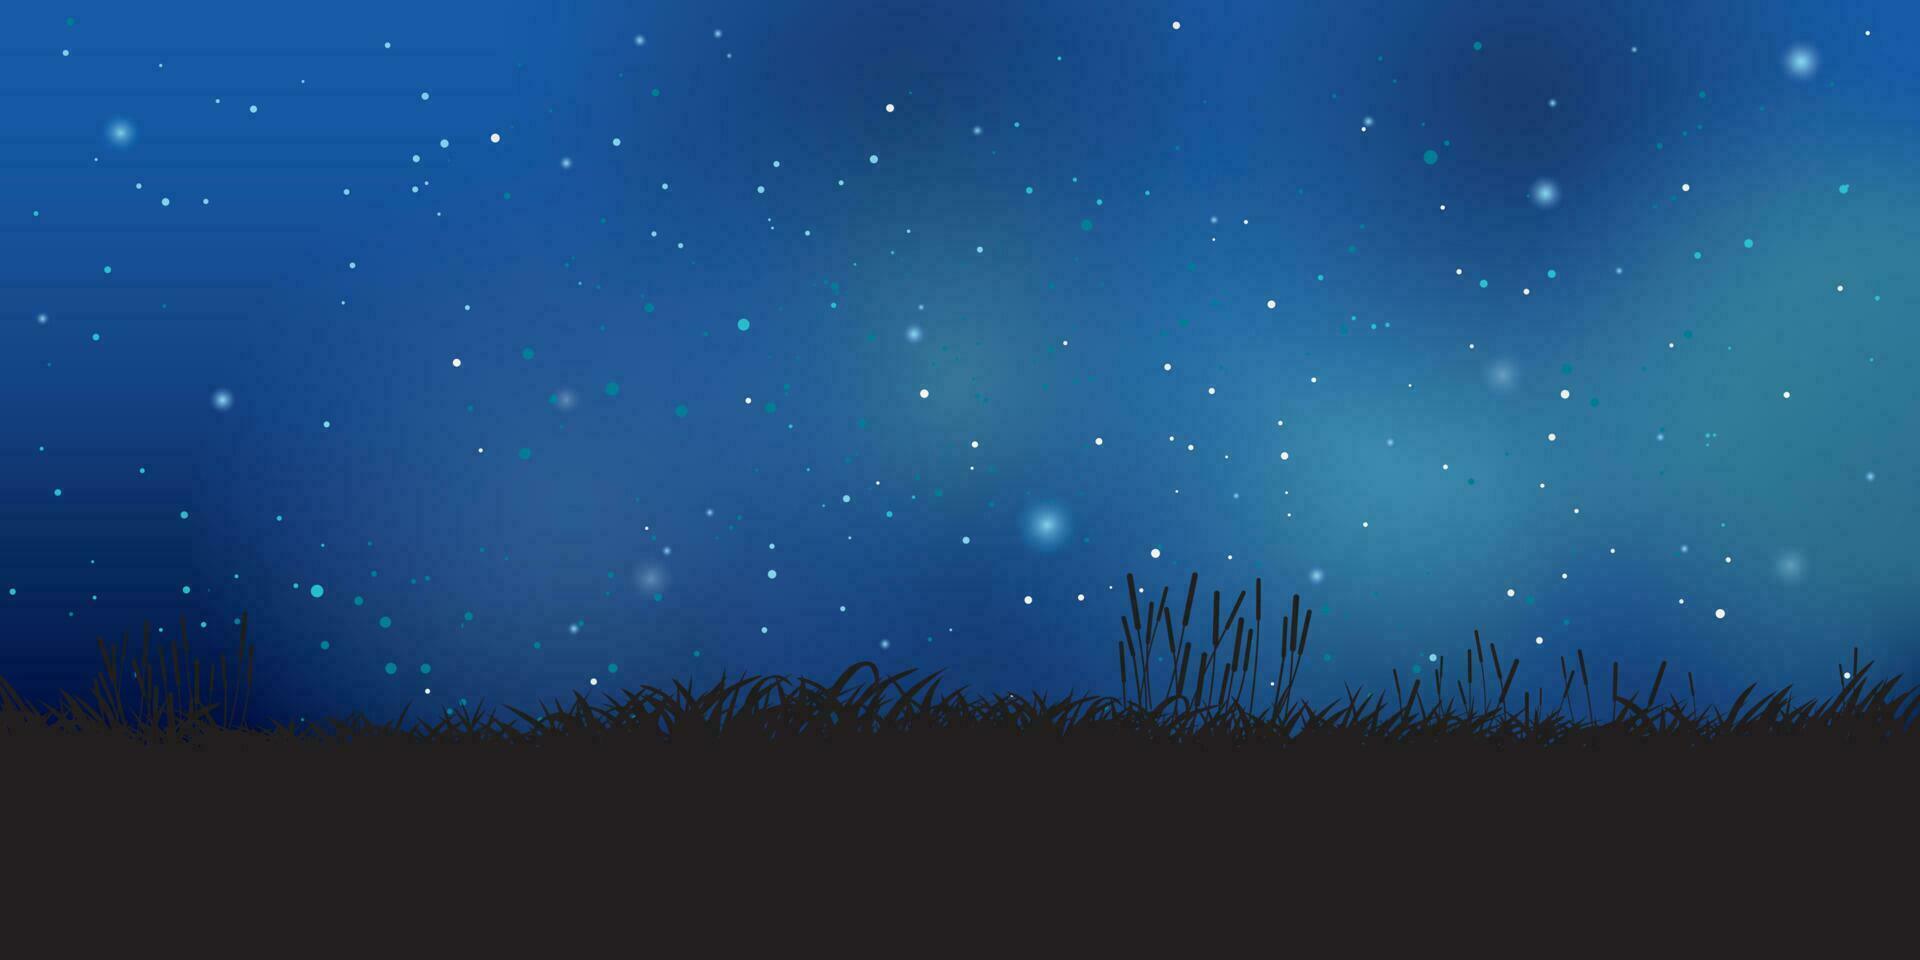 Grass field silhouette with night sky have a lot of stars background vector illustration.